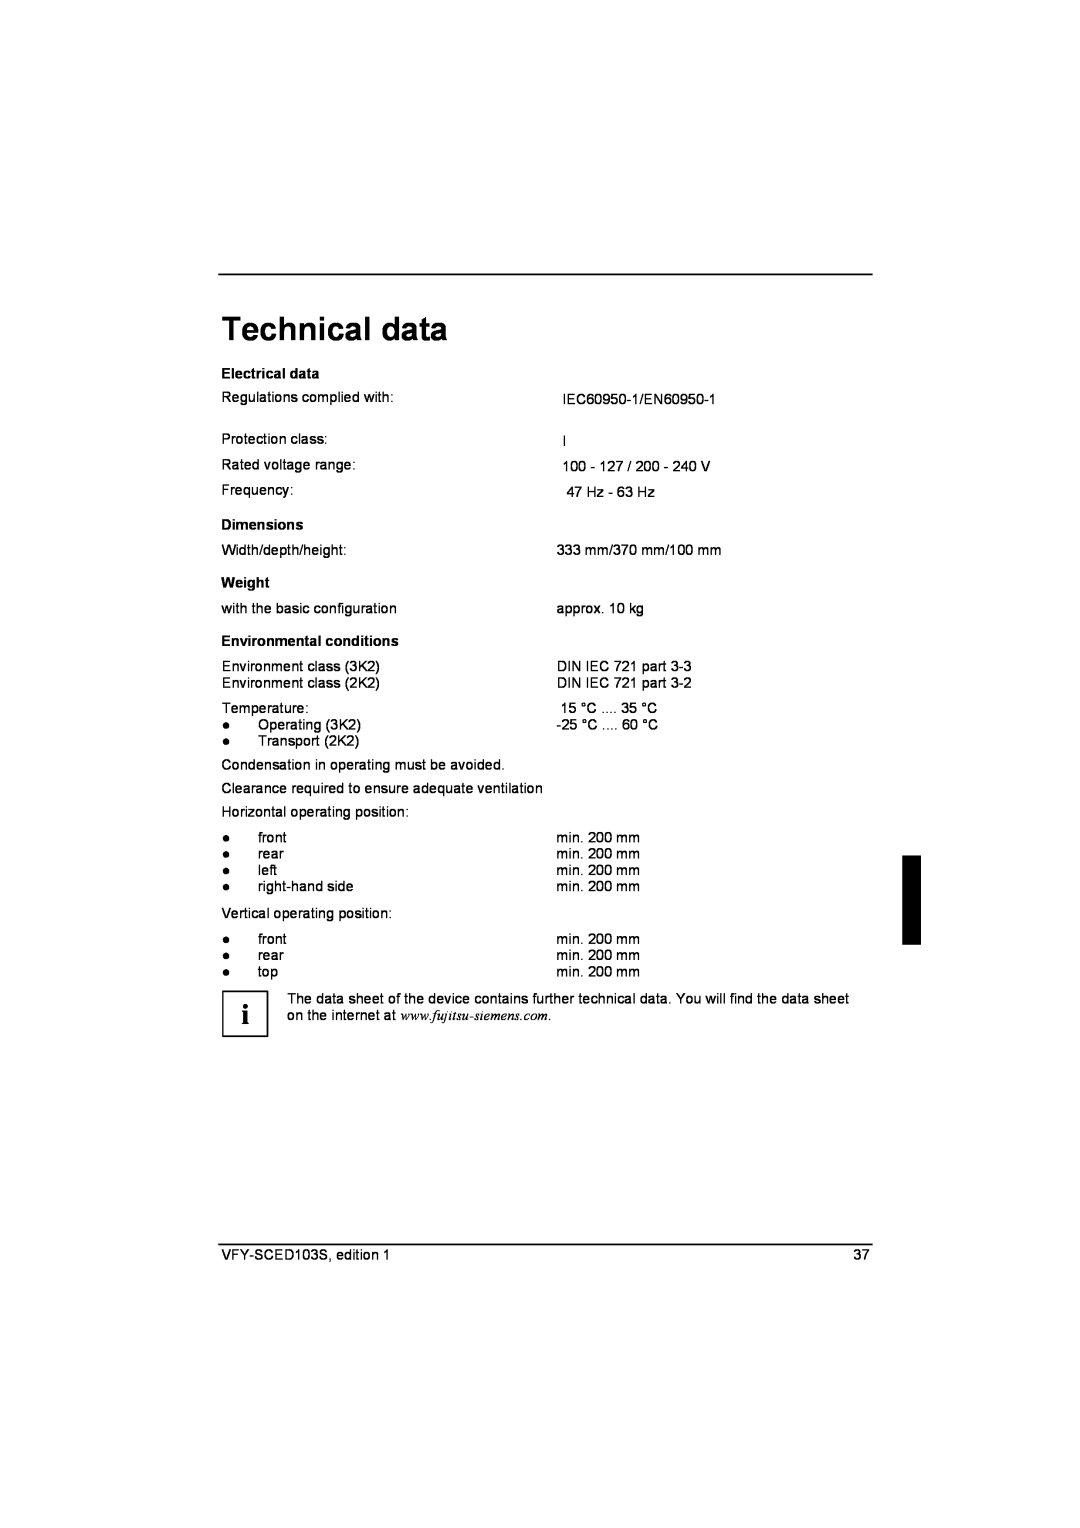 Fujitsu Siemens Computers X103 SFF manual Technical data, Electrical data, Dimensions, Weight, Environmental conditions 